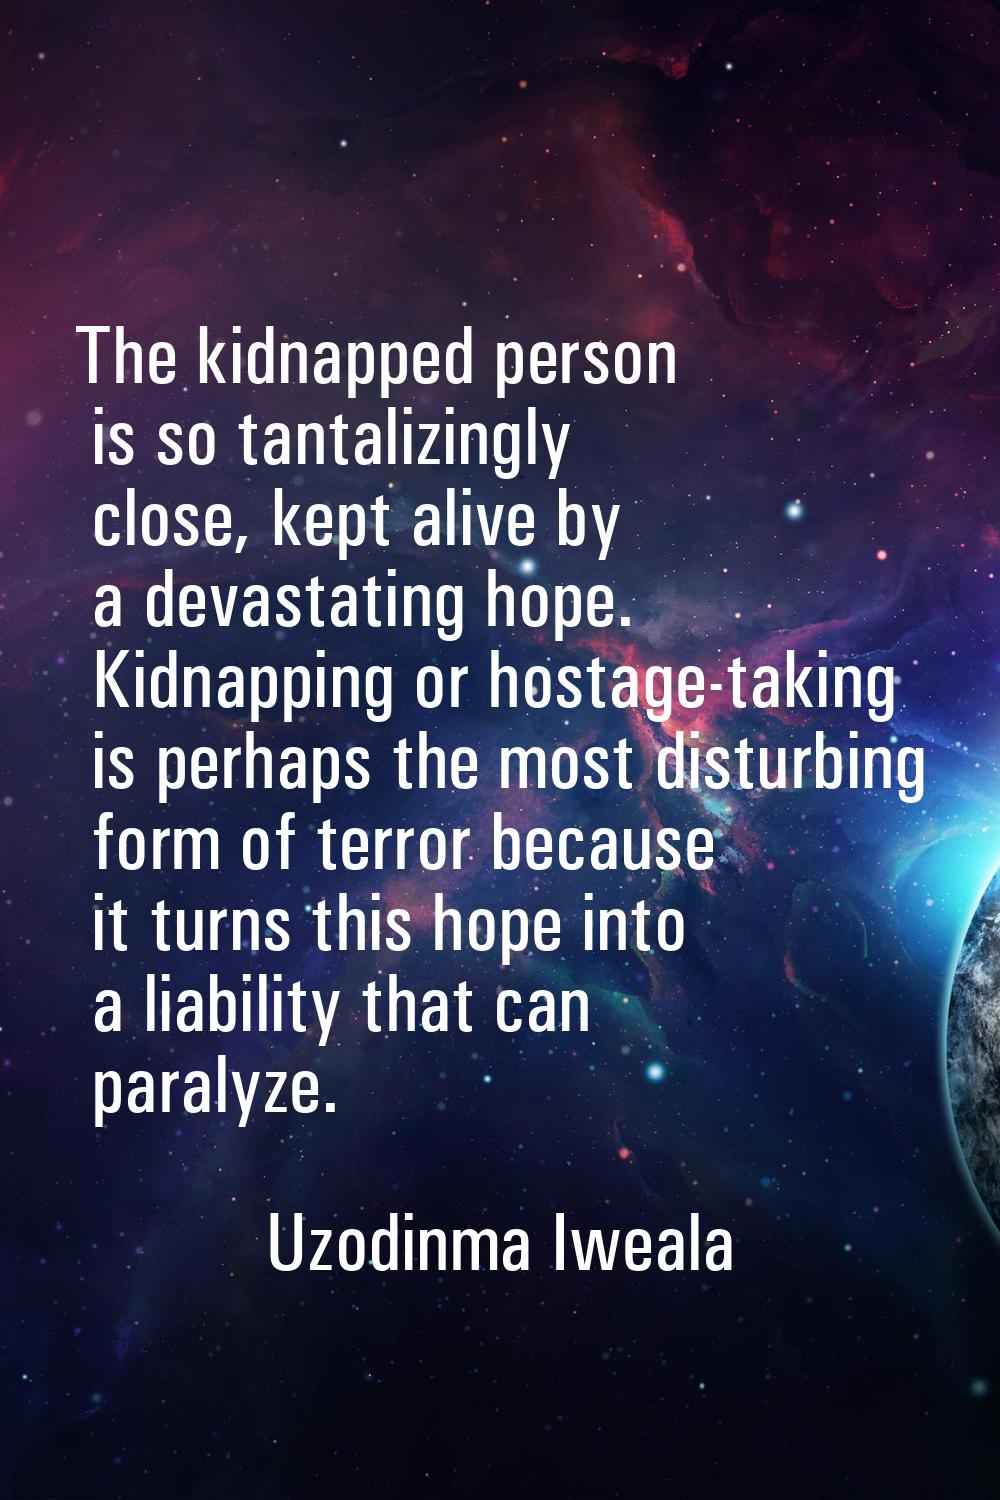 The kidnapped person is so tantalizingly close, kept alive by a devastating hope. Kidnapping or hos